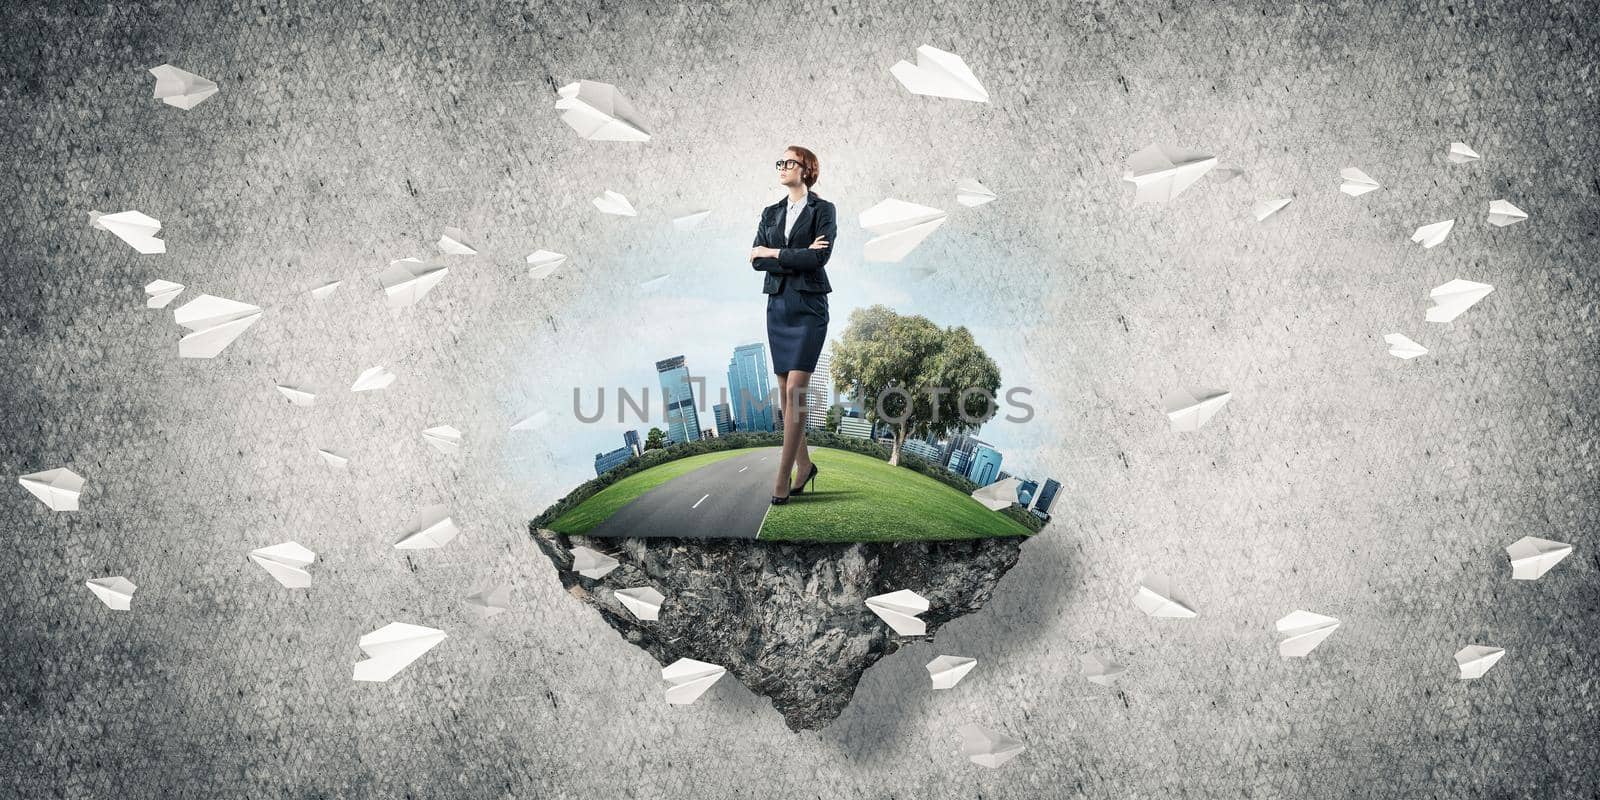 Elegant confident businesswoman standing on green floating island against concrete background